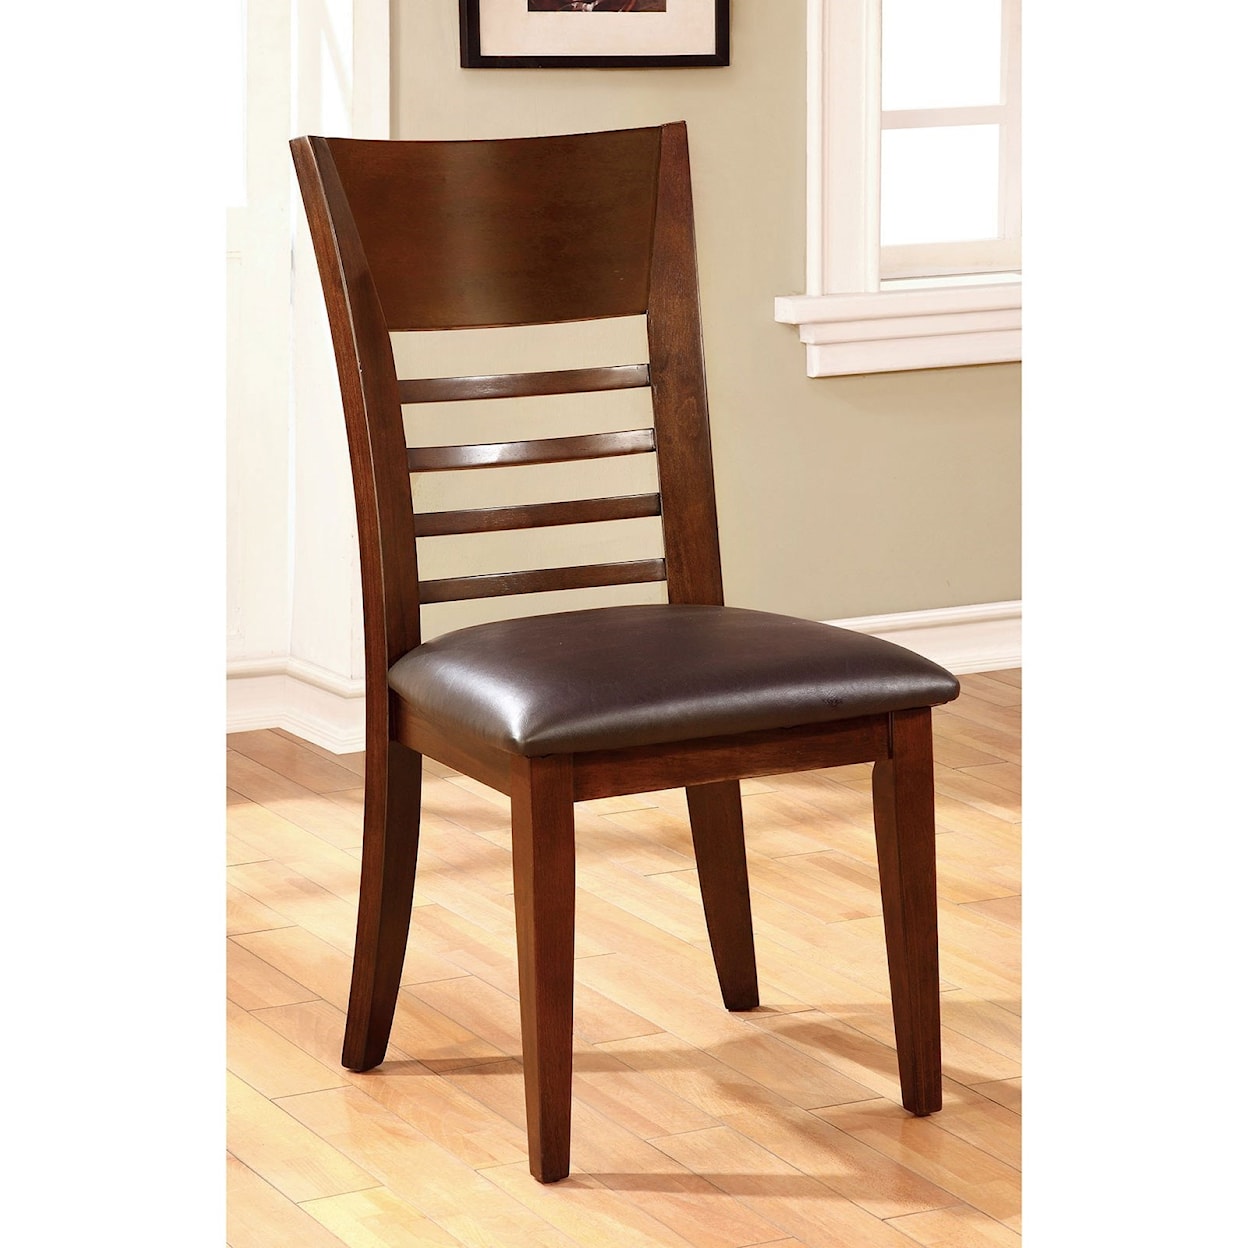 Furniture of America Hillsview Set of 2 Side Chairs